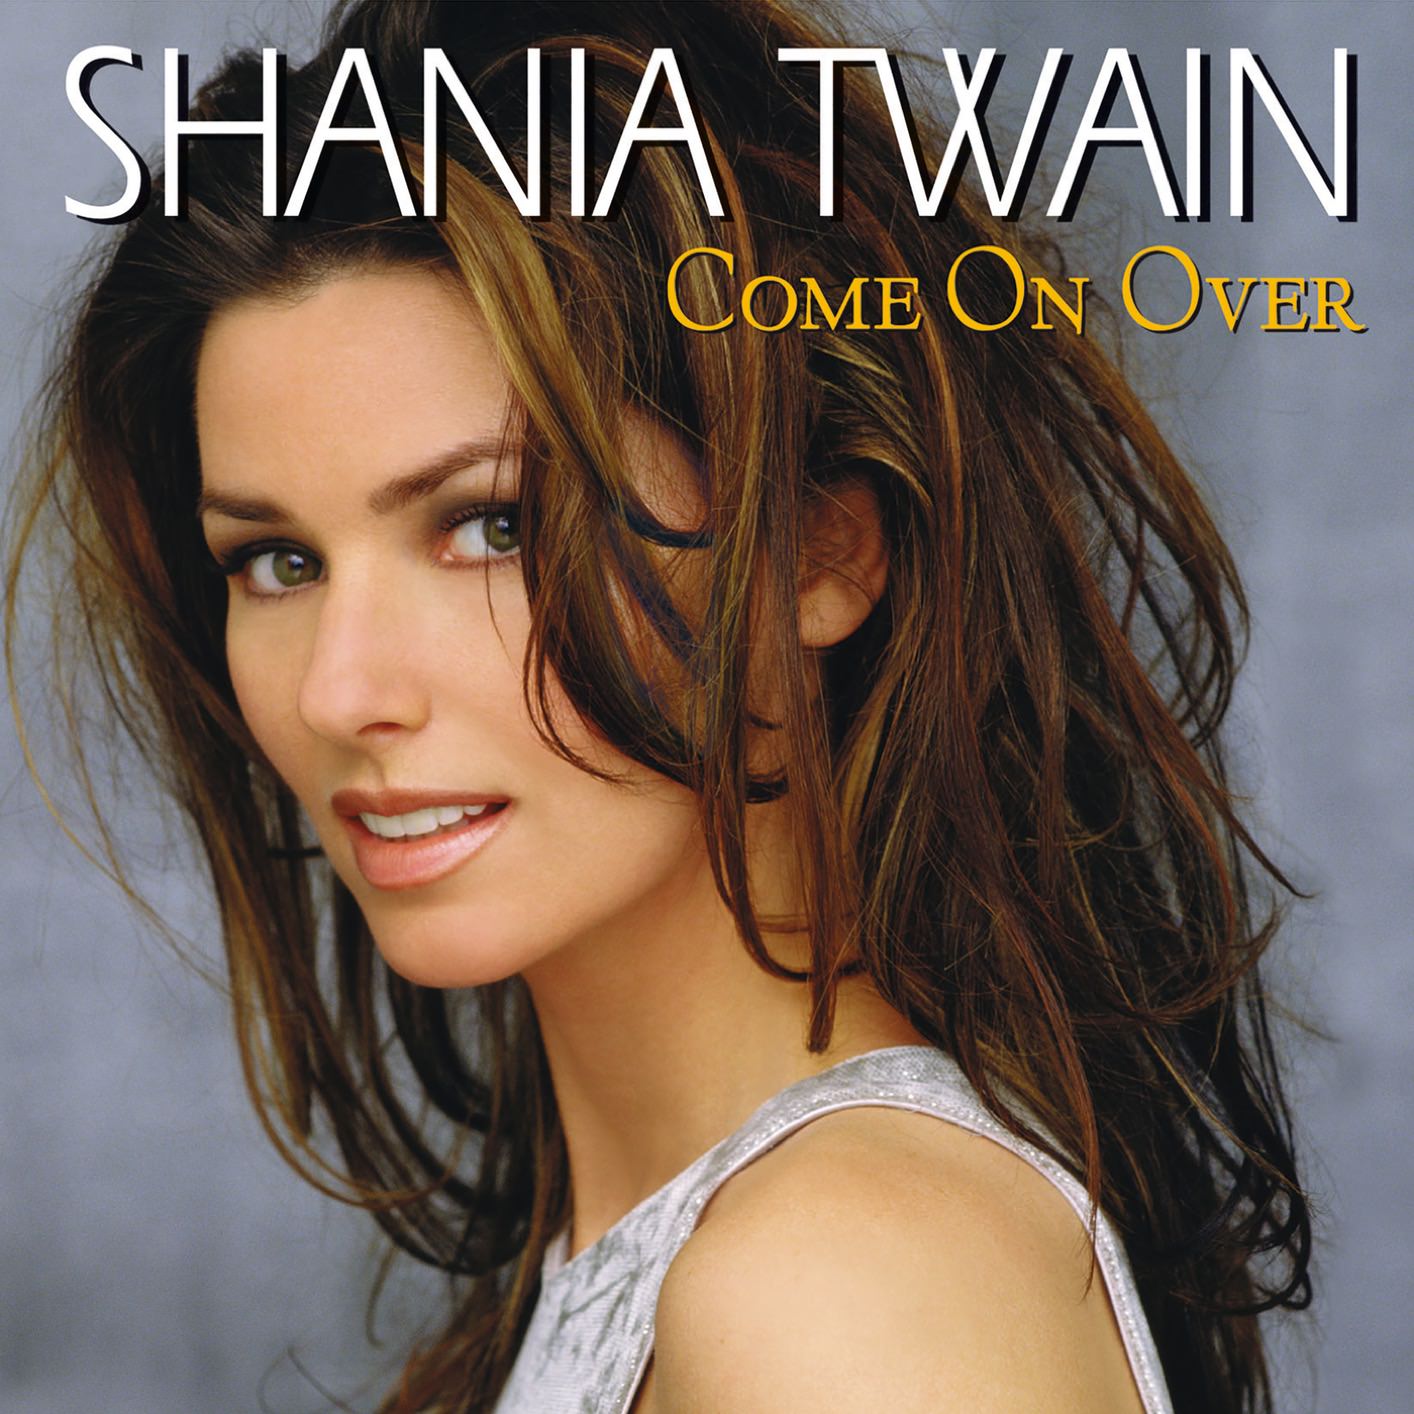 Shania Twain - Come On Over (International Version Revisited) (1999/2017) [Qobuz FLAC 24bit/96kHz]